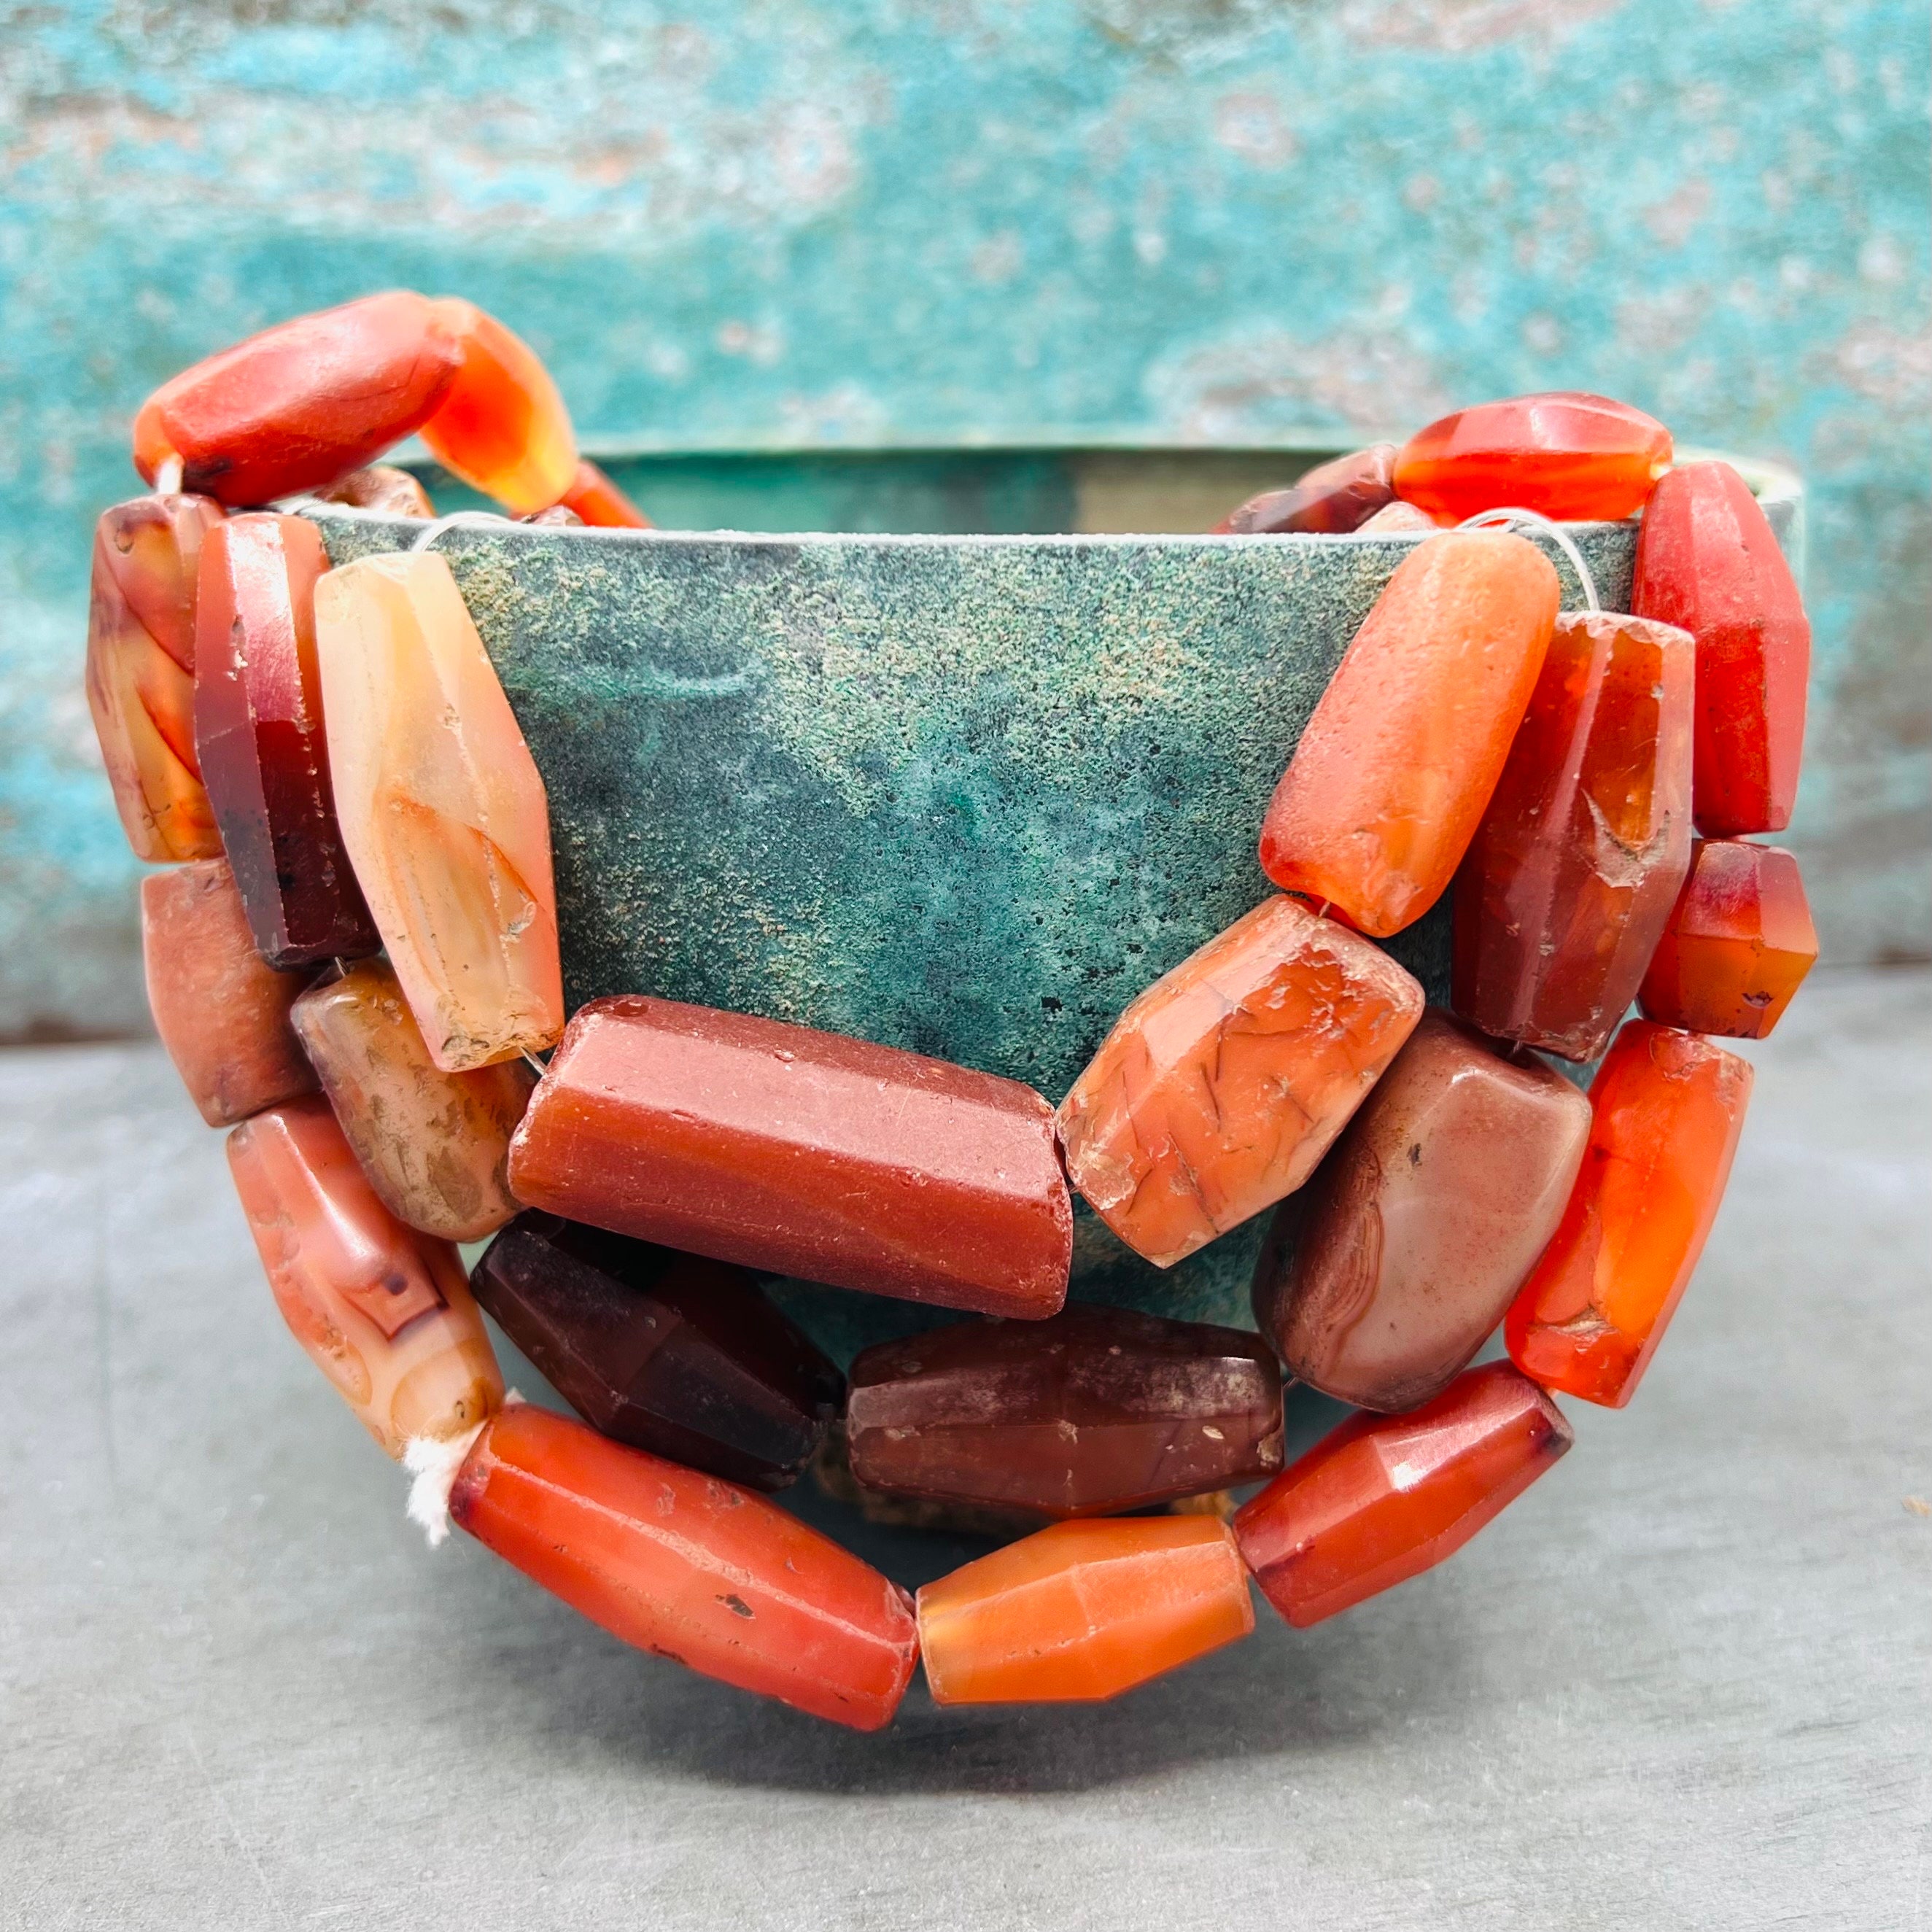 Old carnelian beads from the African trade old trade beads - Etsy 日本